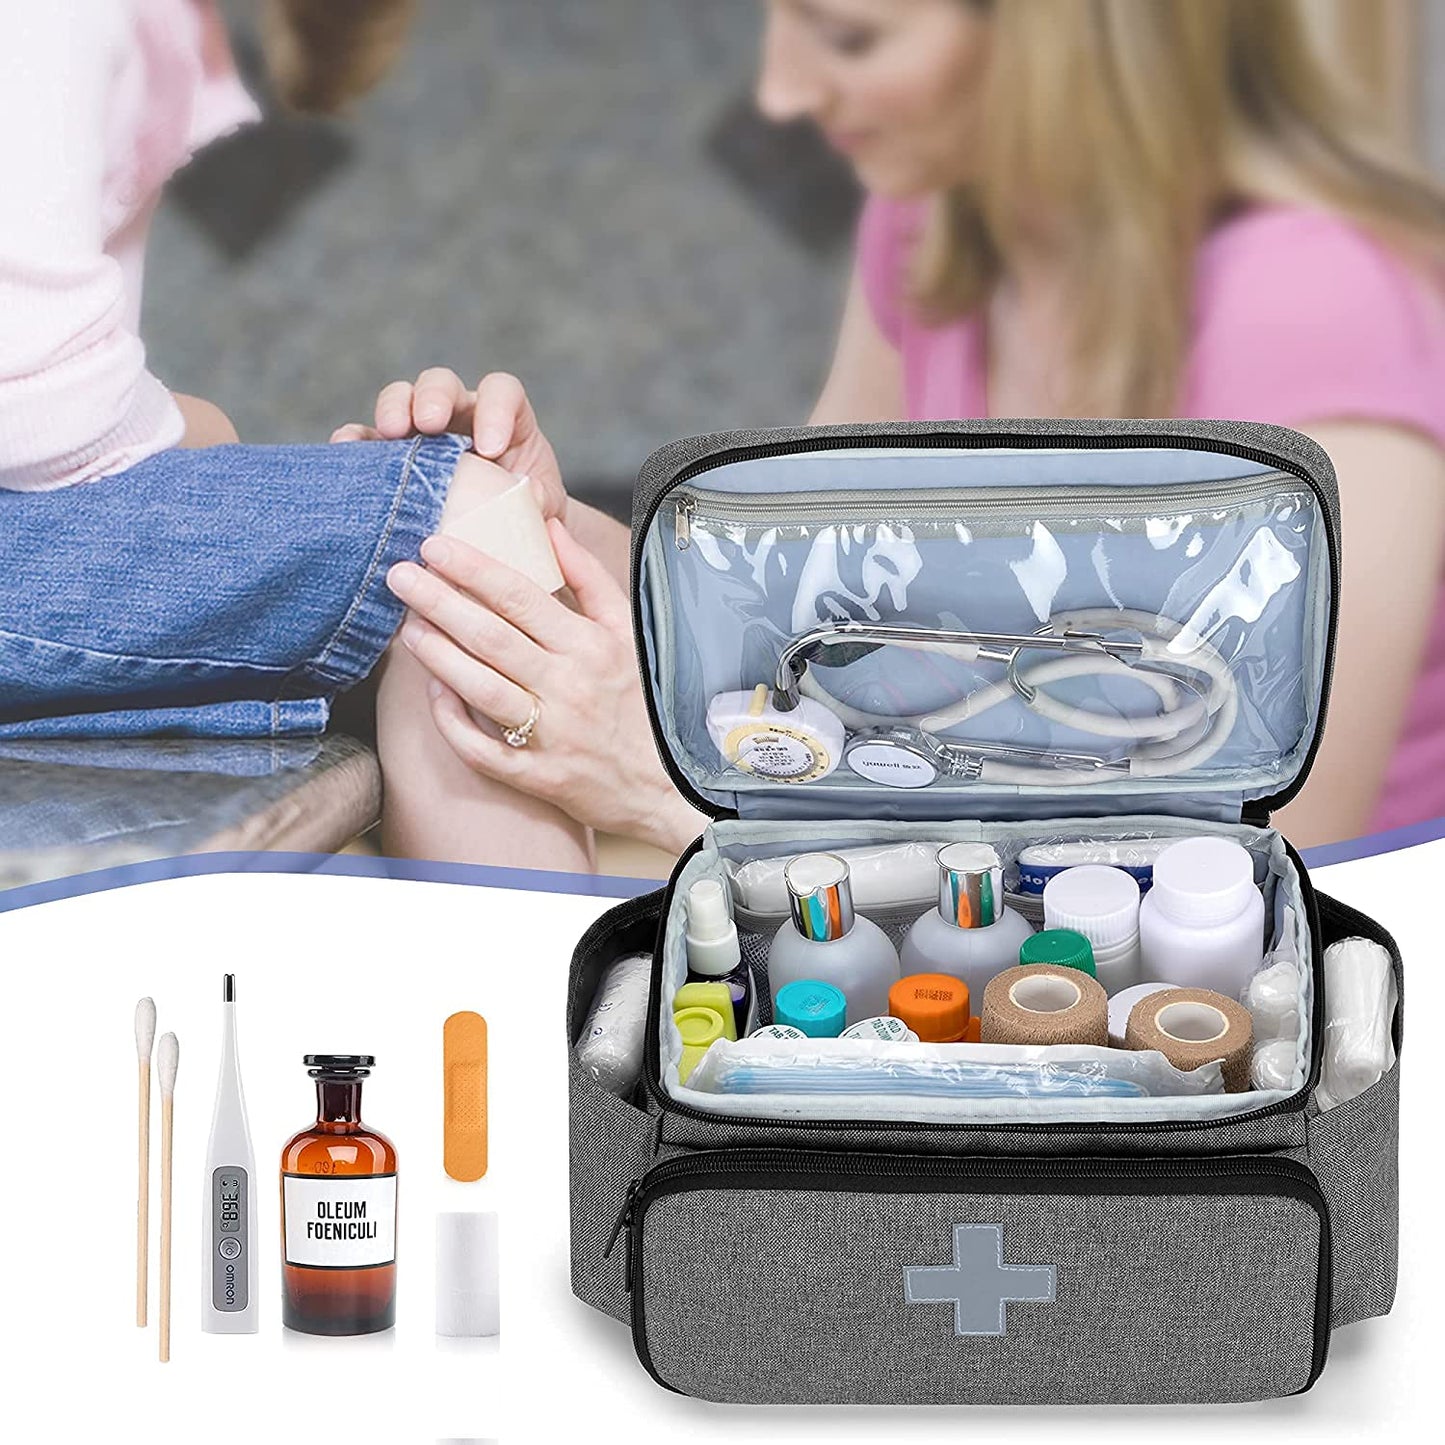 Doctor Medicine Storage Case Bag, Empty, Hospital Clinic or Family First  Aid Organizer Case Box for Emergency Medical Kits (Bag Only)